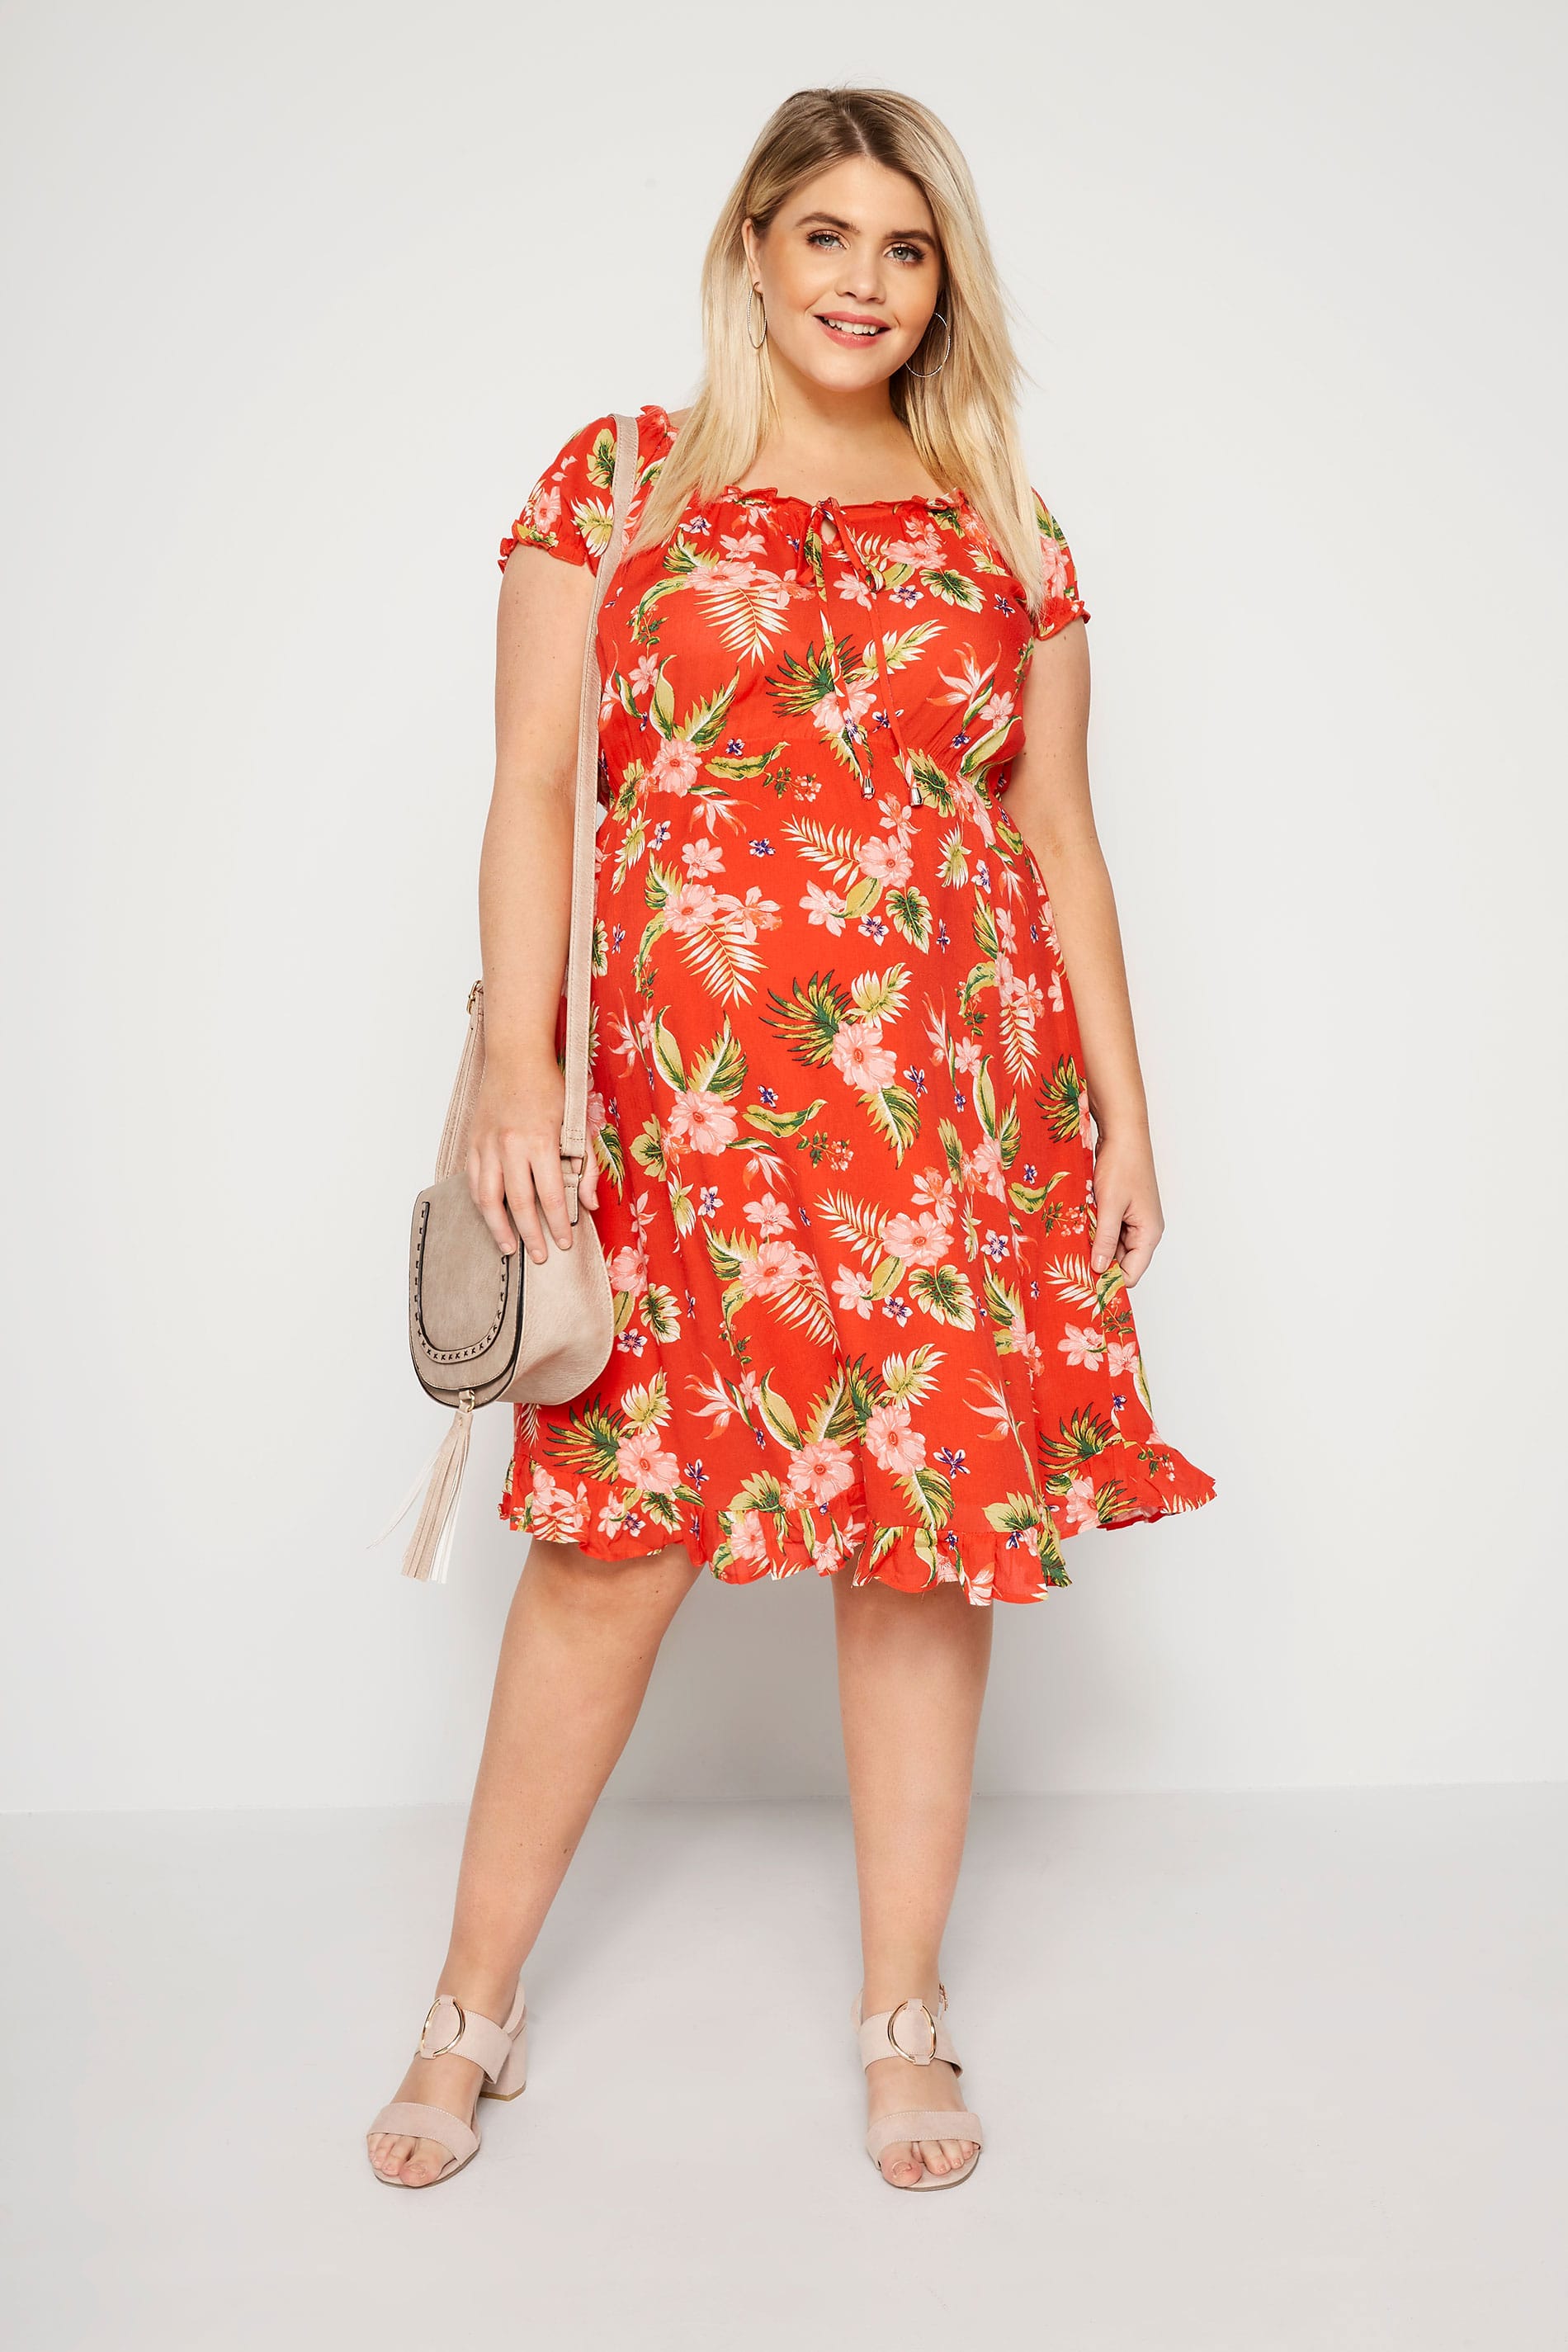 BUMP IT UP MATERNITY Red Floral Gypsy Dress | Plus Sizes 16 to 32 ...